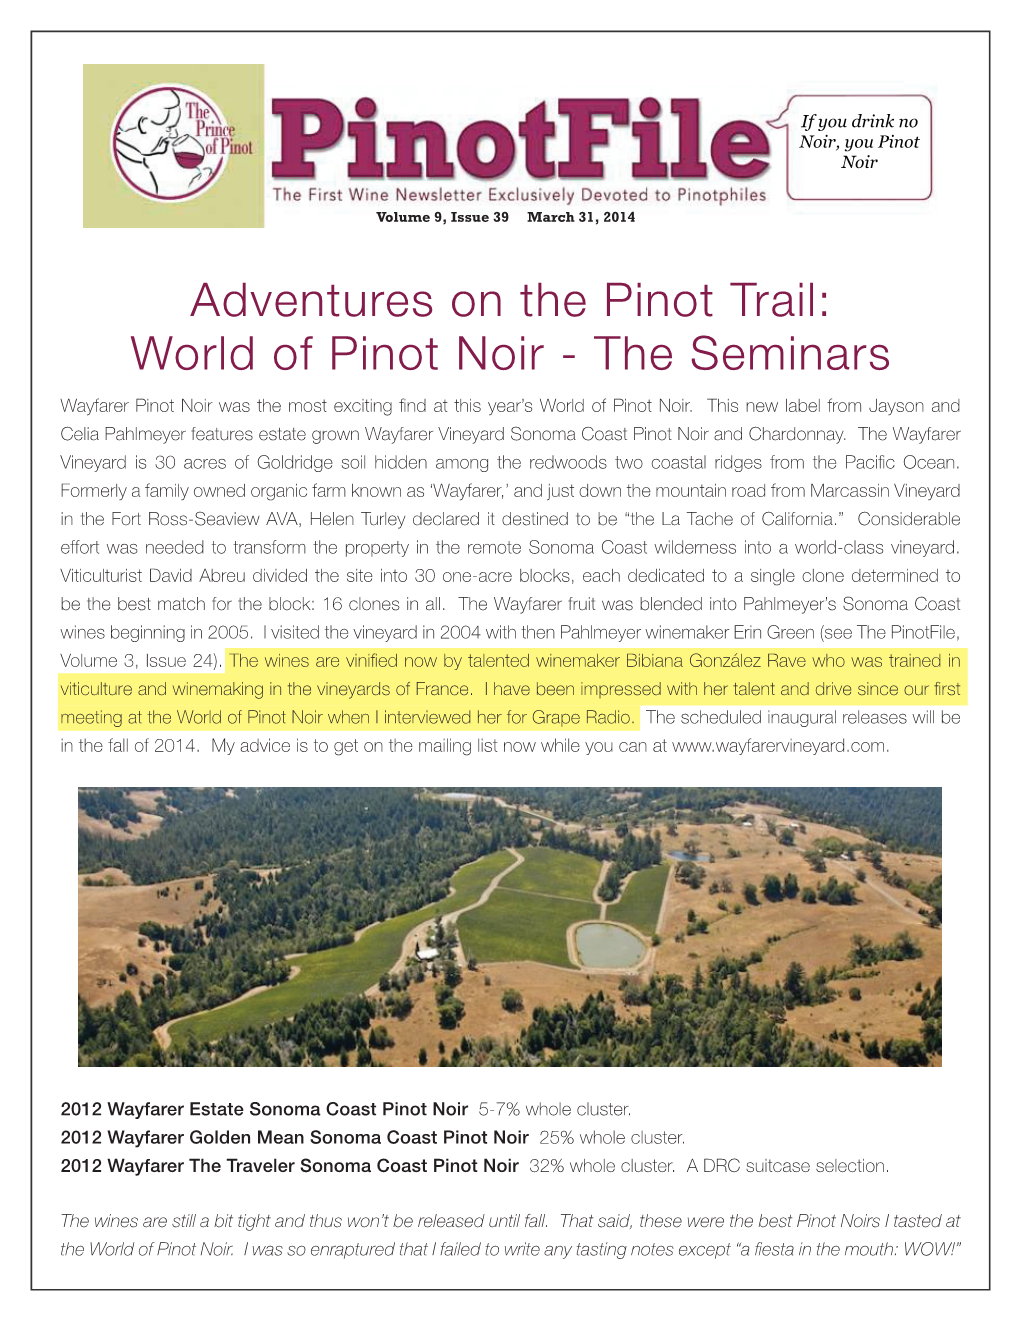 Adventures on the Pinot Trail: World of Pinot Noir